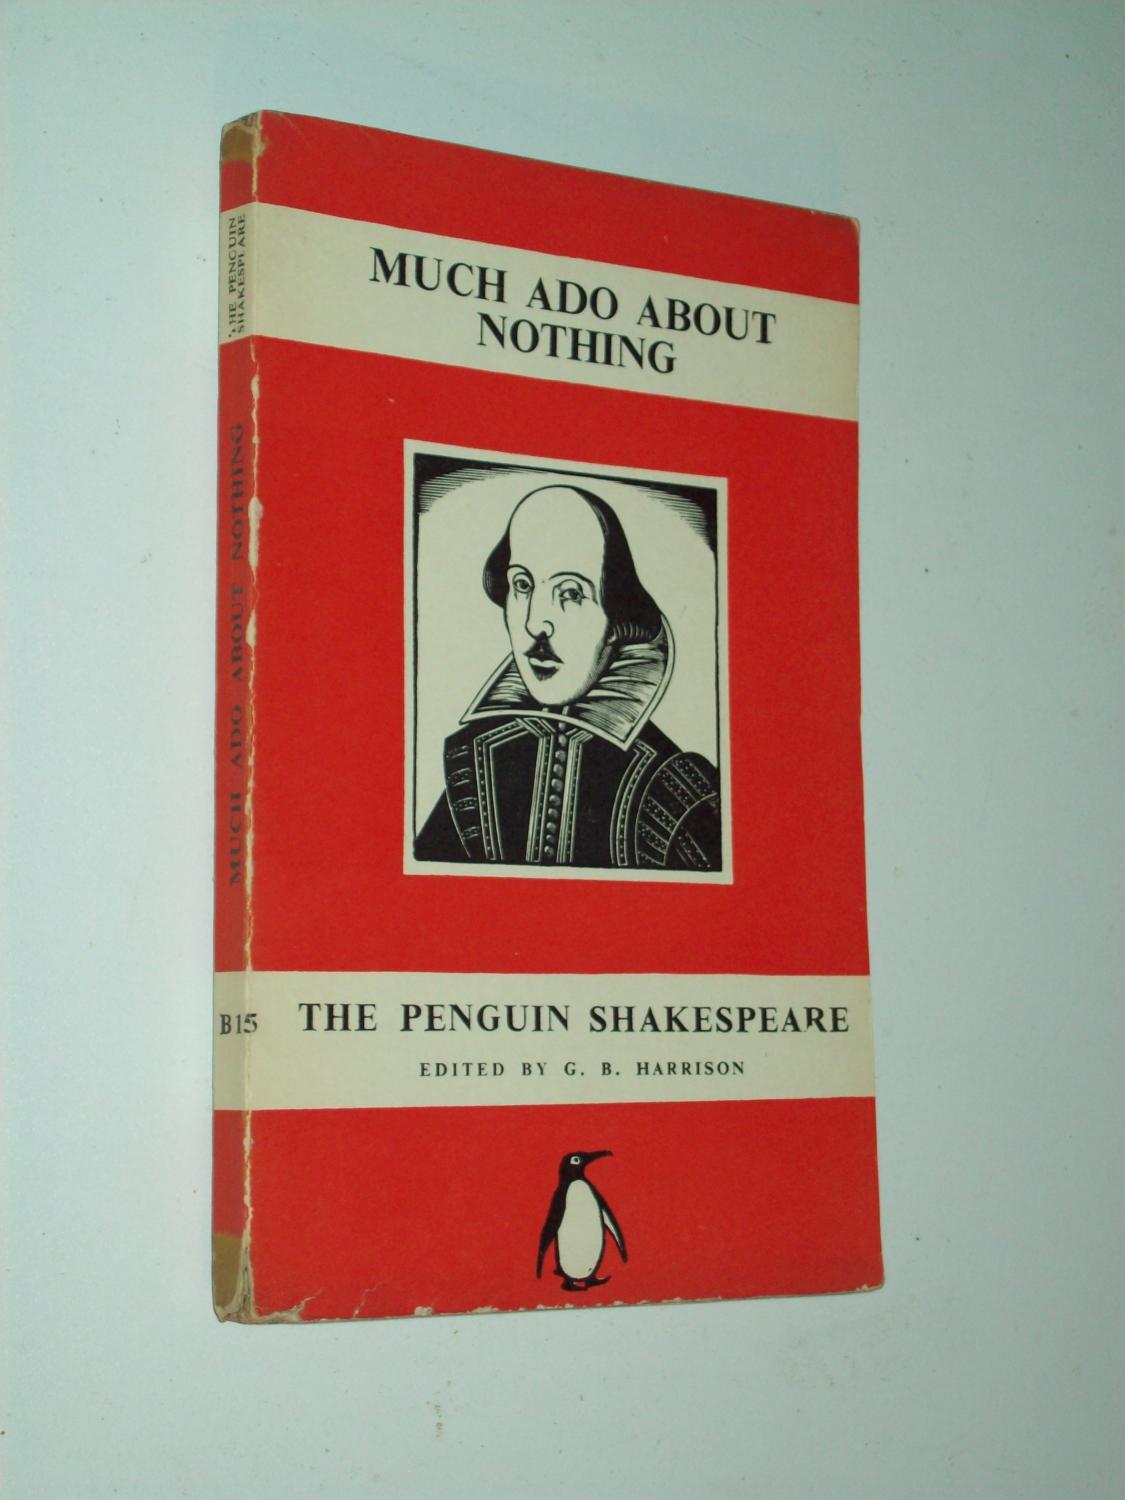 Much Ado About Nothing [The Penguin Shakespeare B15] - William Shakespeare: edited by G. B. Harrison